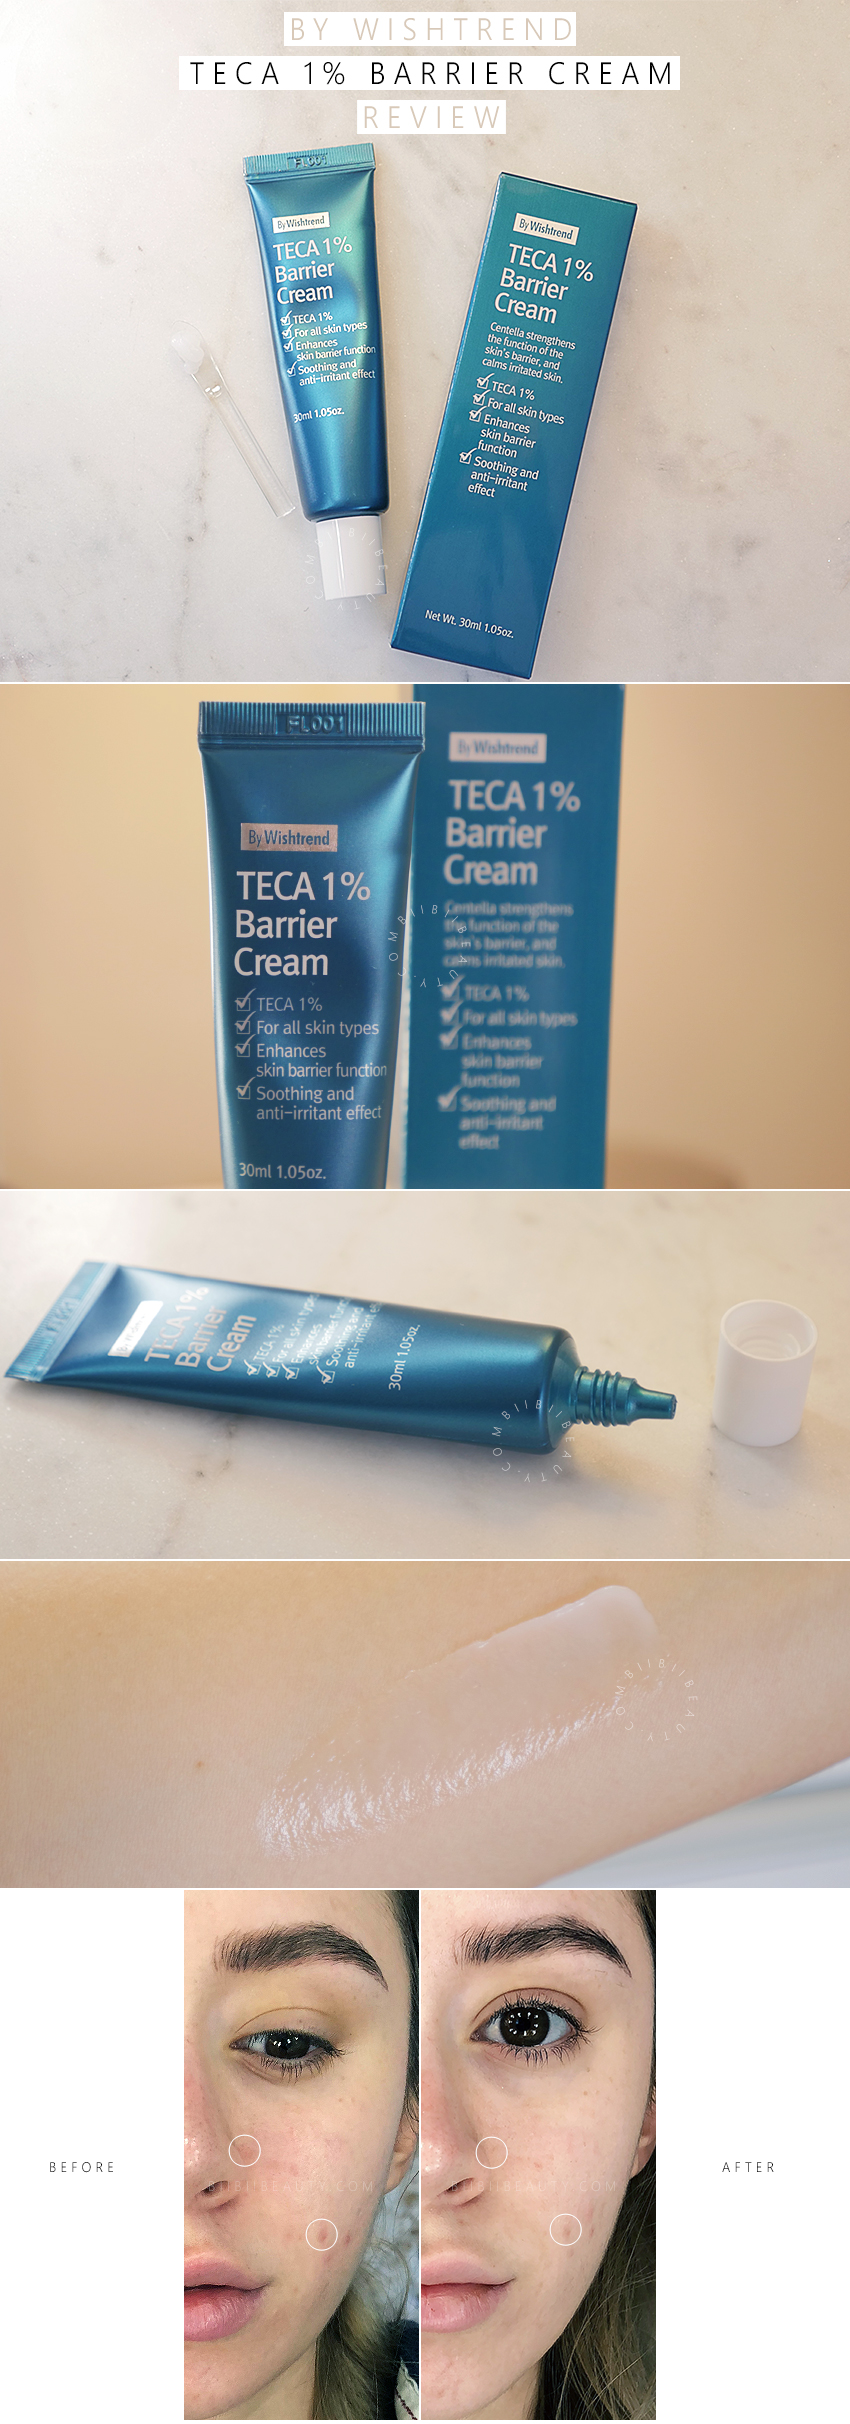 By Wishtrend Teca 1% Barrier Cream Review on Acne Prone Skin